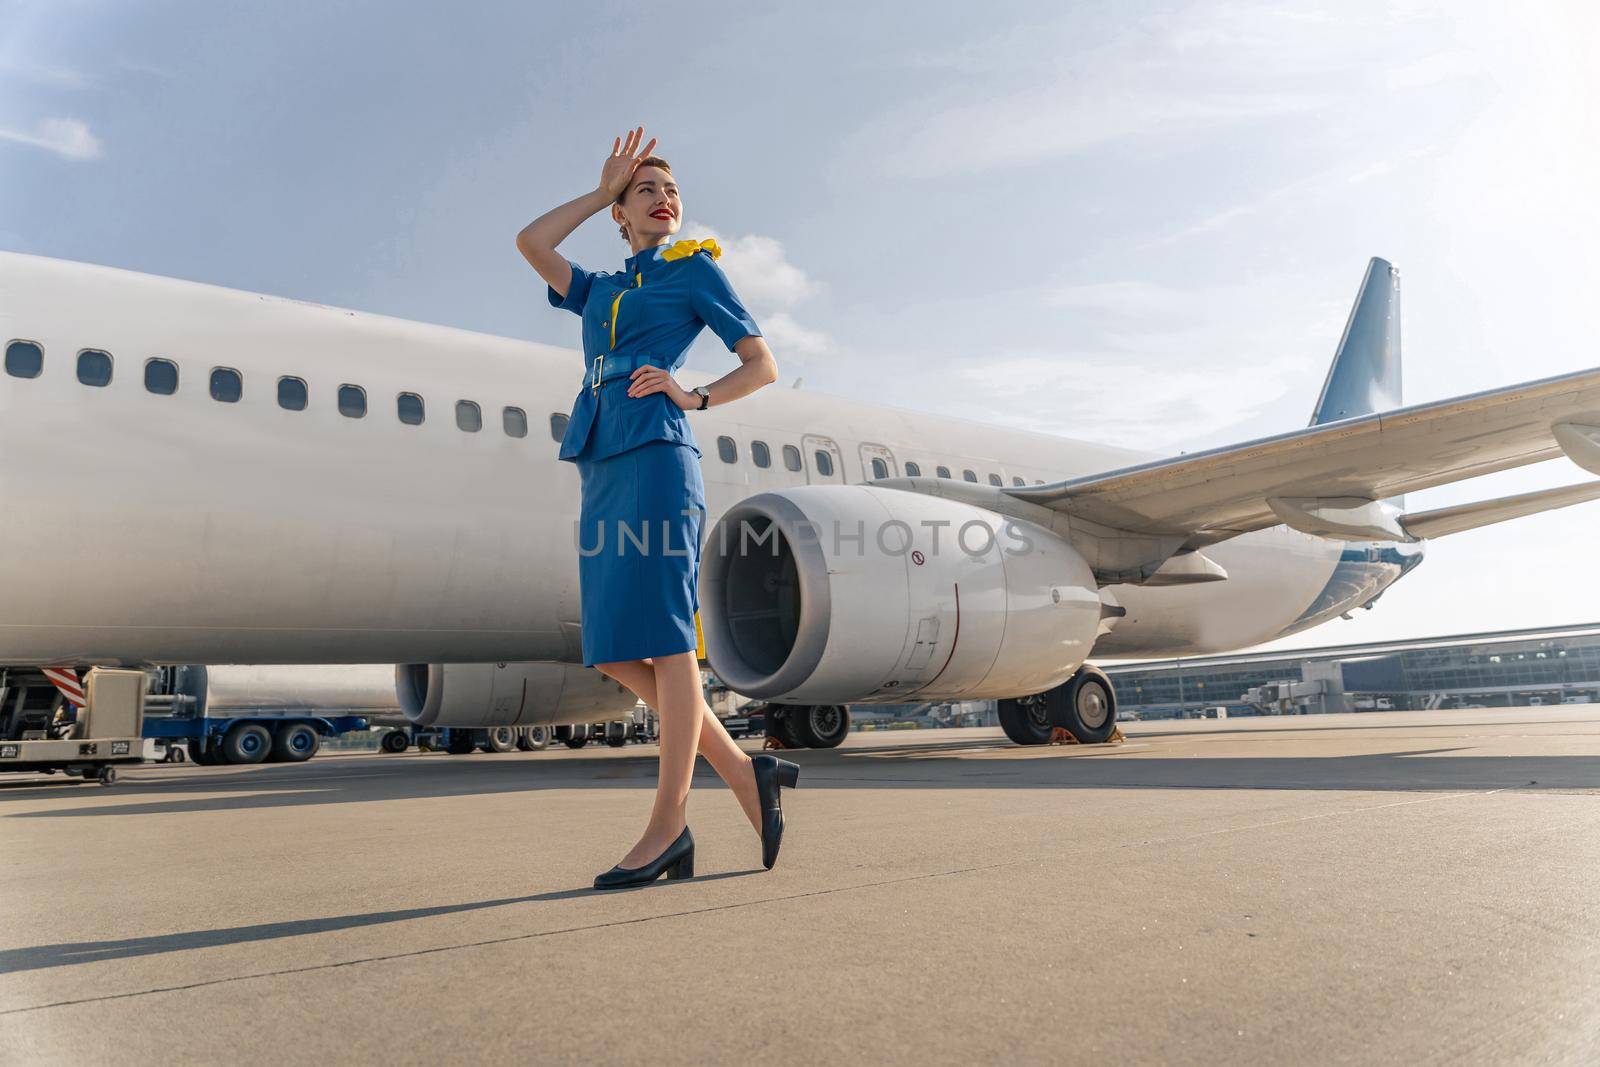 Smiling stewardess in elegant uniform standing on runway with airplane in the background